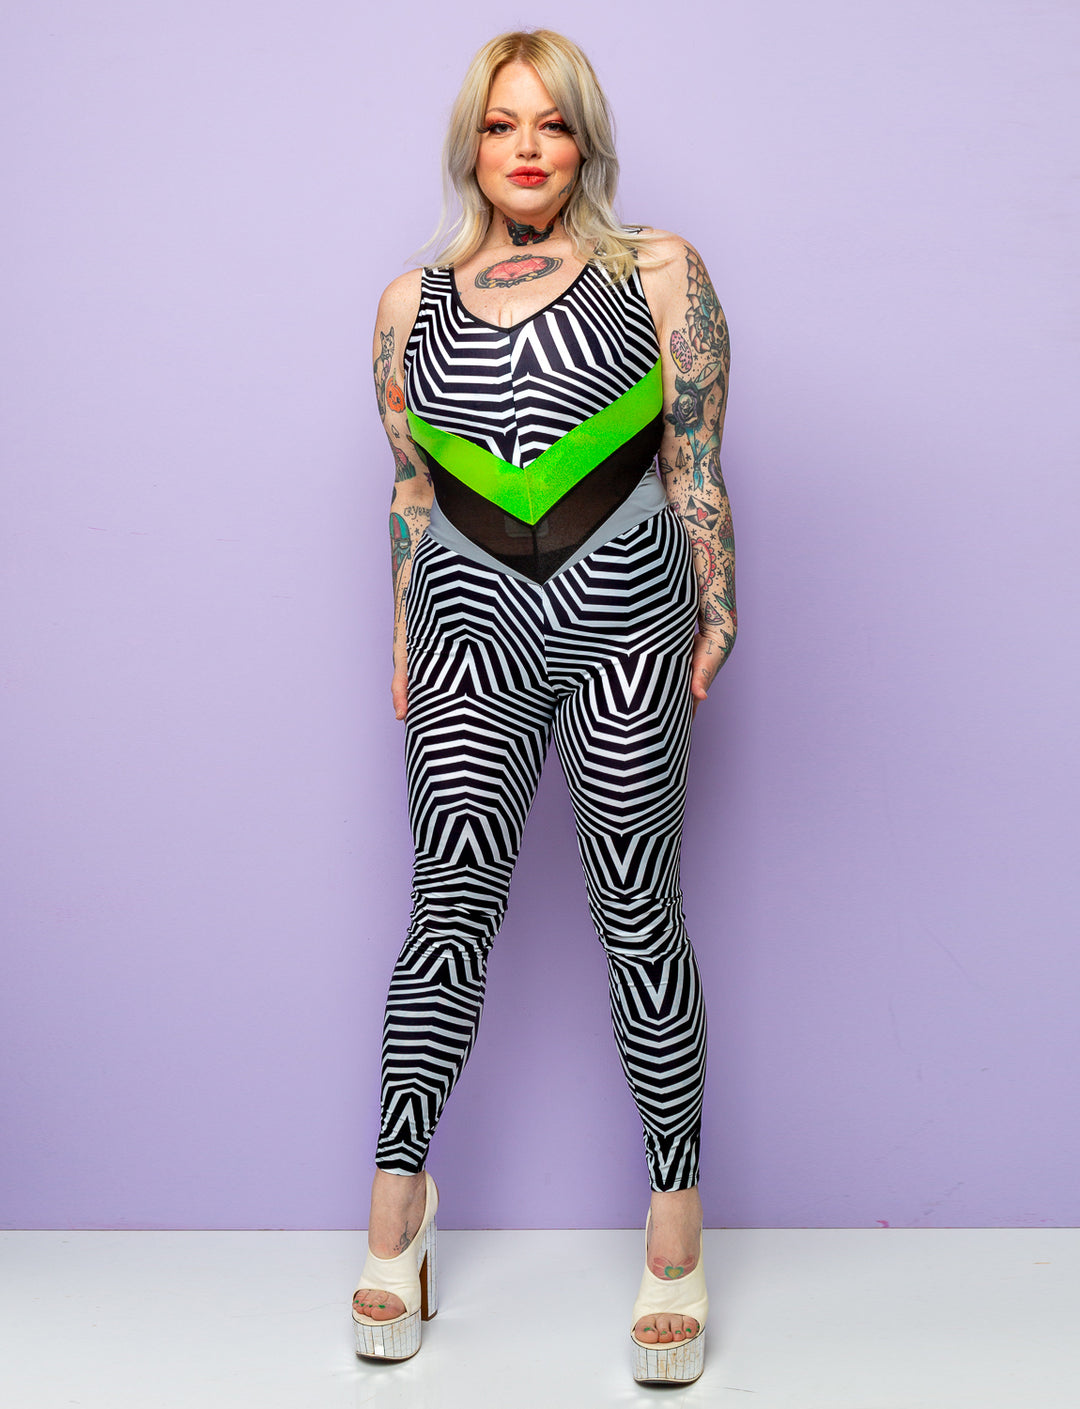 Woman modelling a black and white geometric printed lycra catsuit.